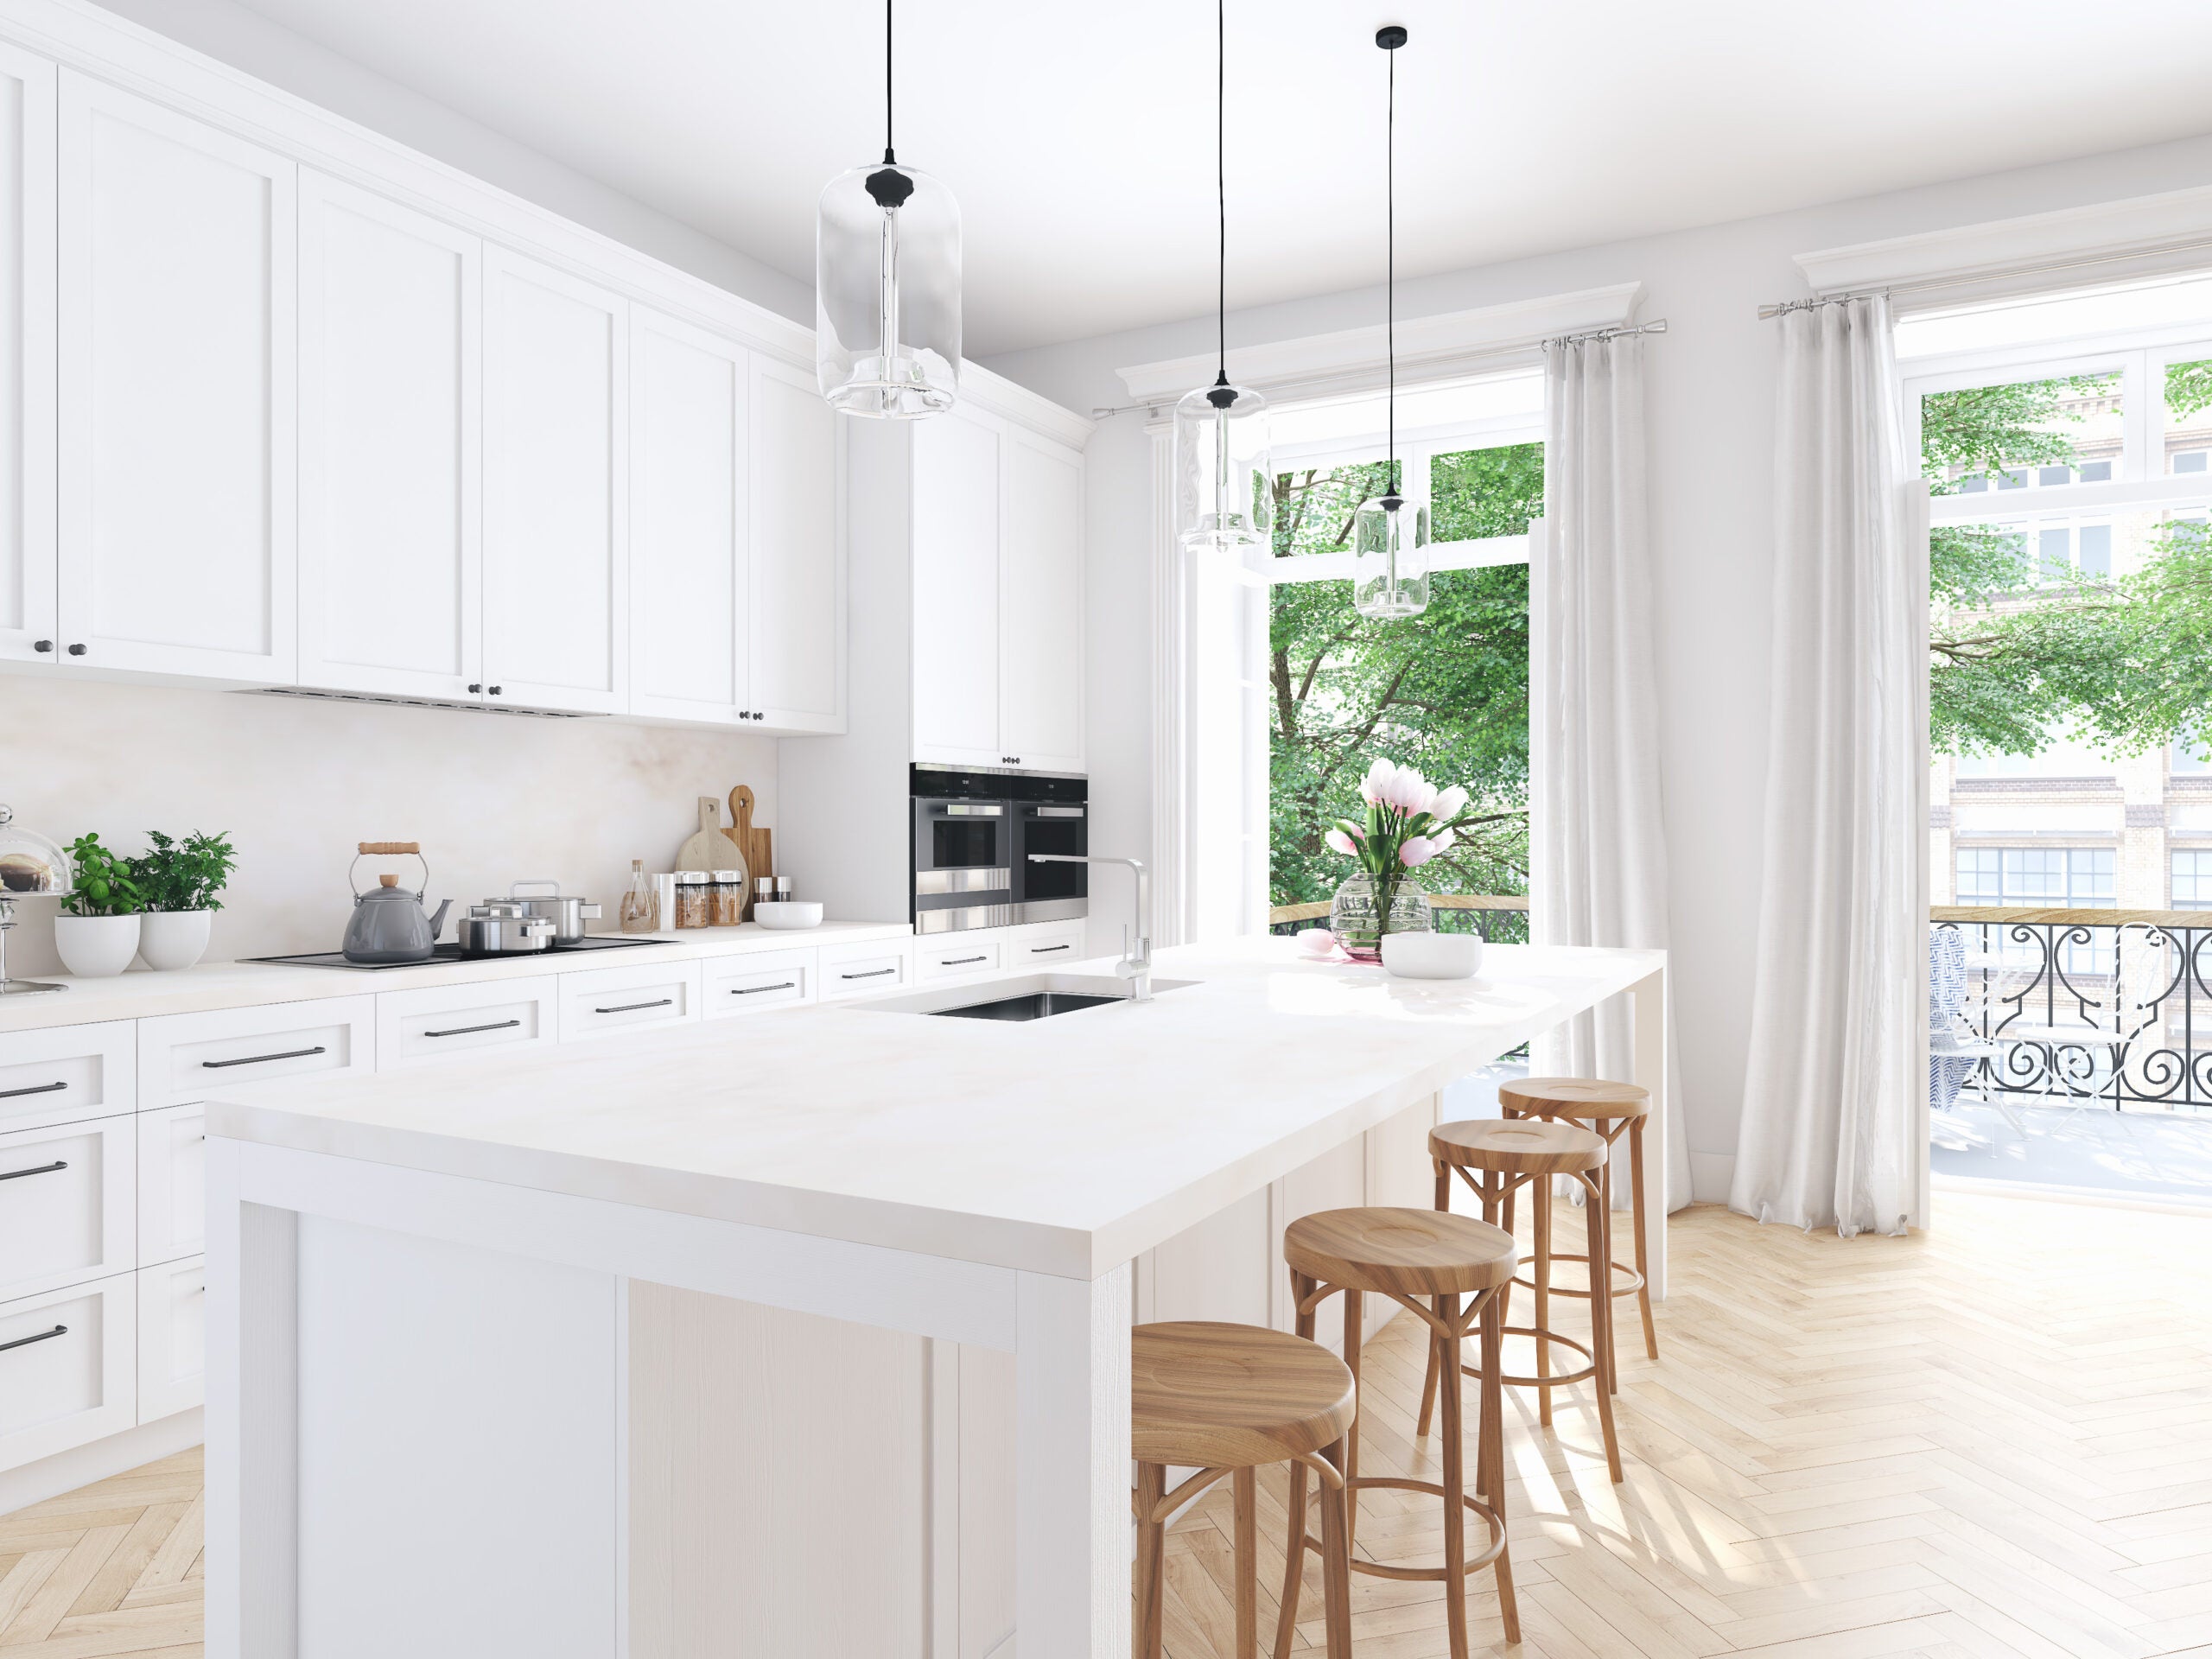 3D rendering of modern kitchen in a loft with white paint color, cabinetry, and counters.